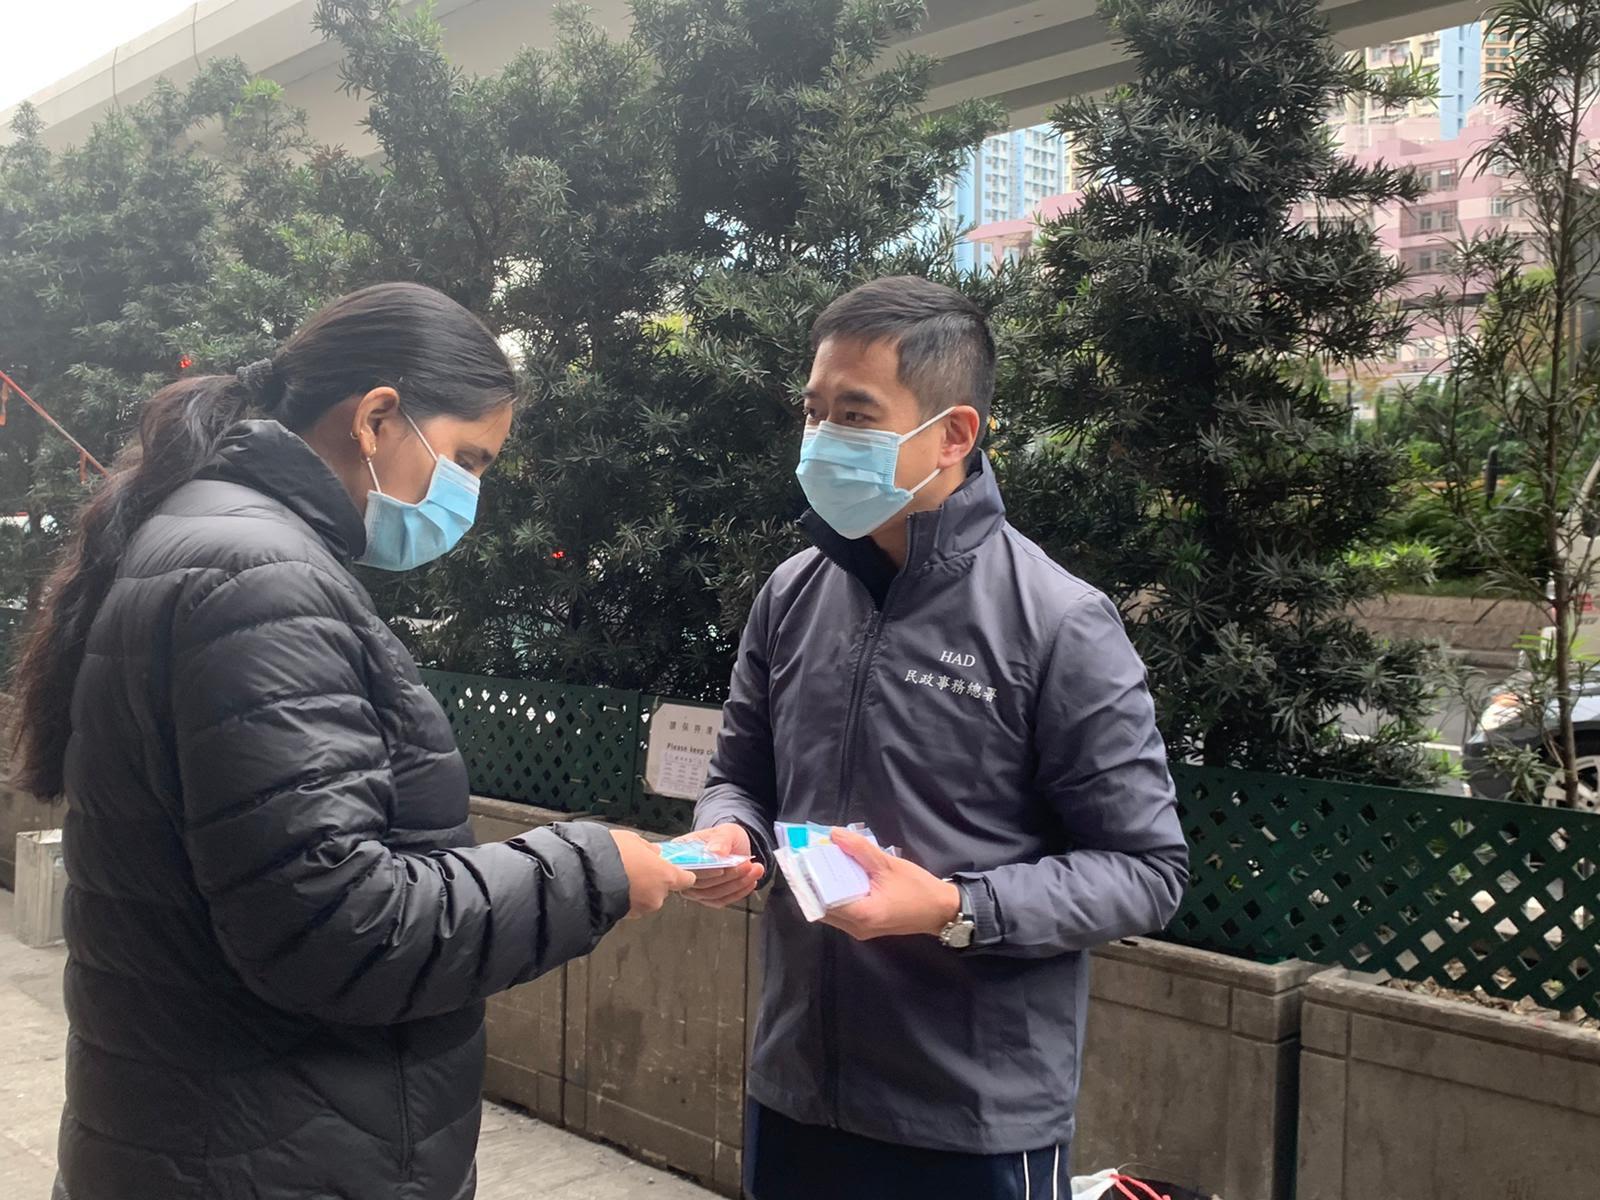 The Yau Tsim Mong District Office today (January 31) started to distribute rapid test kits to residents within the district for testing through district bodies, building organisations and associations of ethnic minorities.